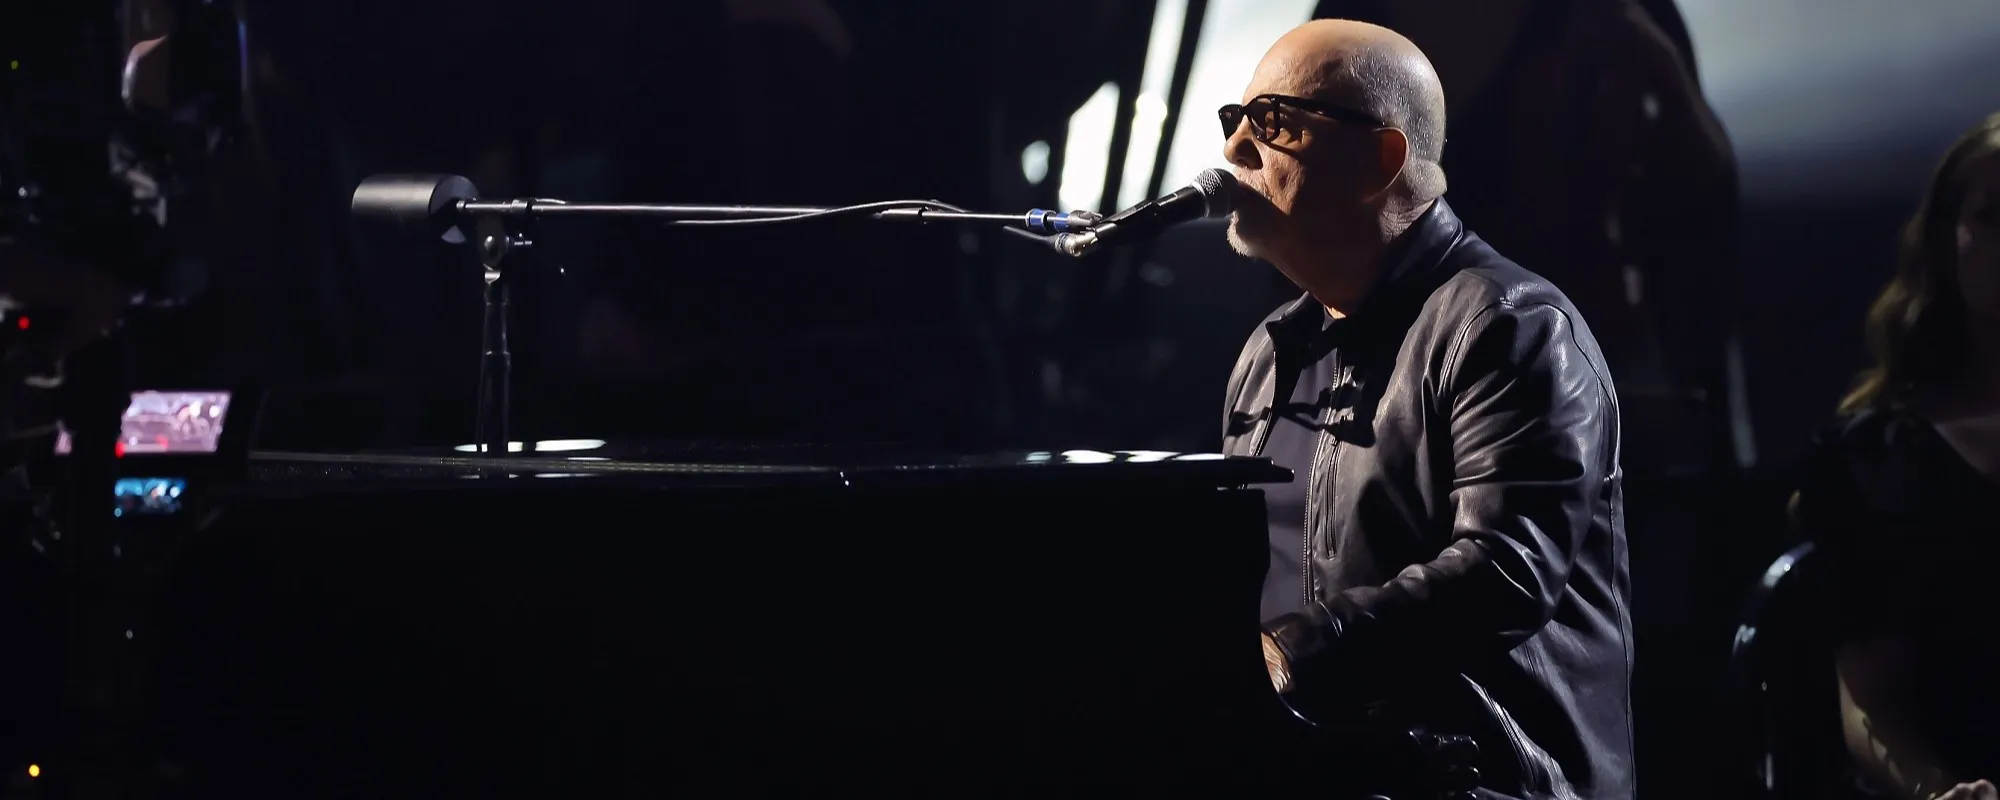 Billy Joel Is Back on the ‘Billboard’ Hot 100 for the First Time Since 1997 with New Single